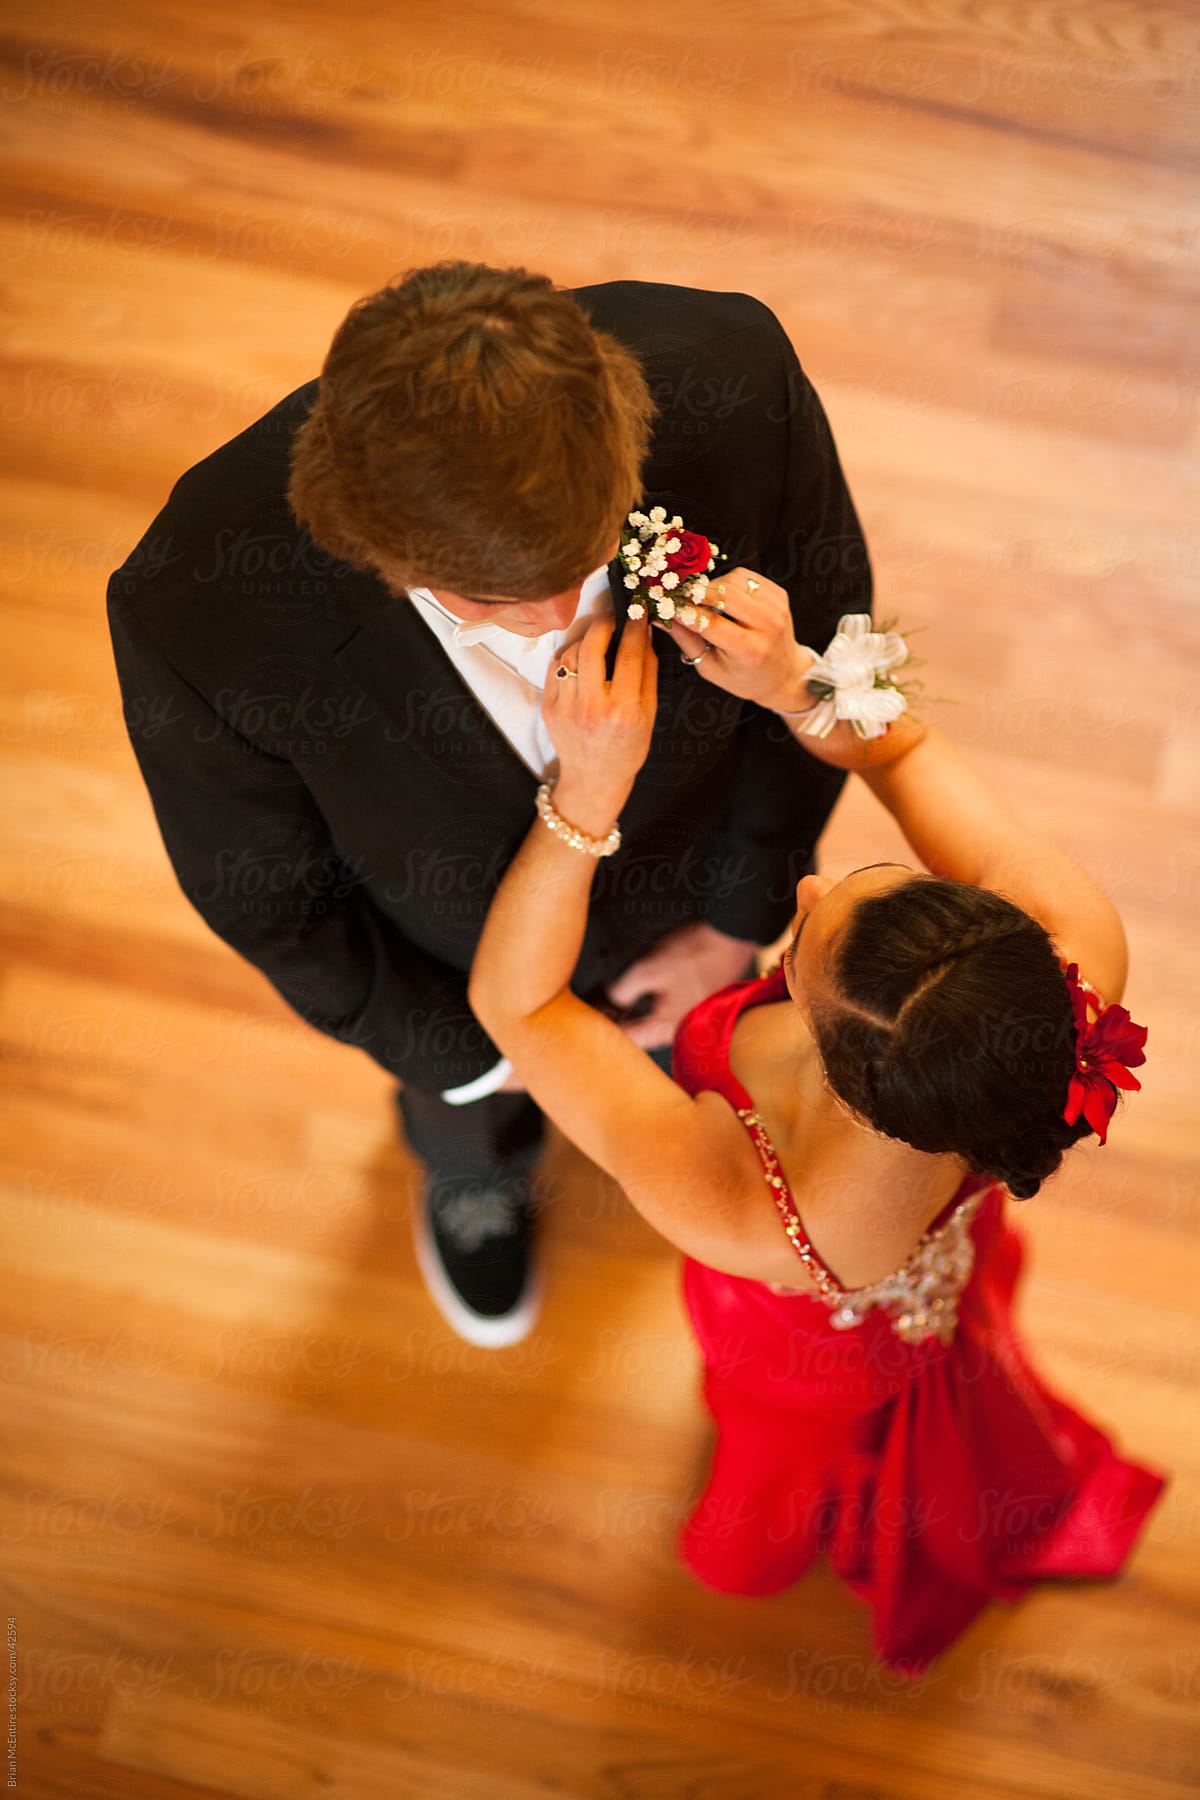 Prom: Young woman pins boutineer on her date